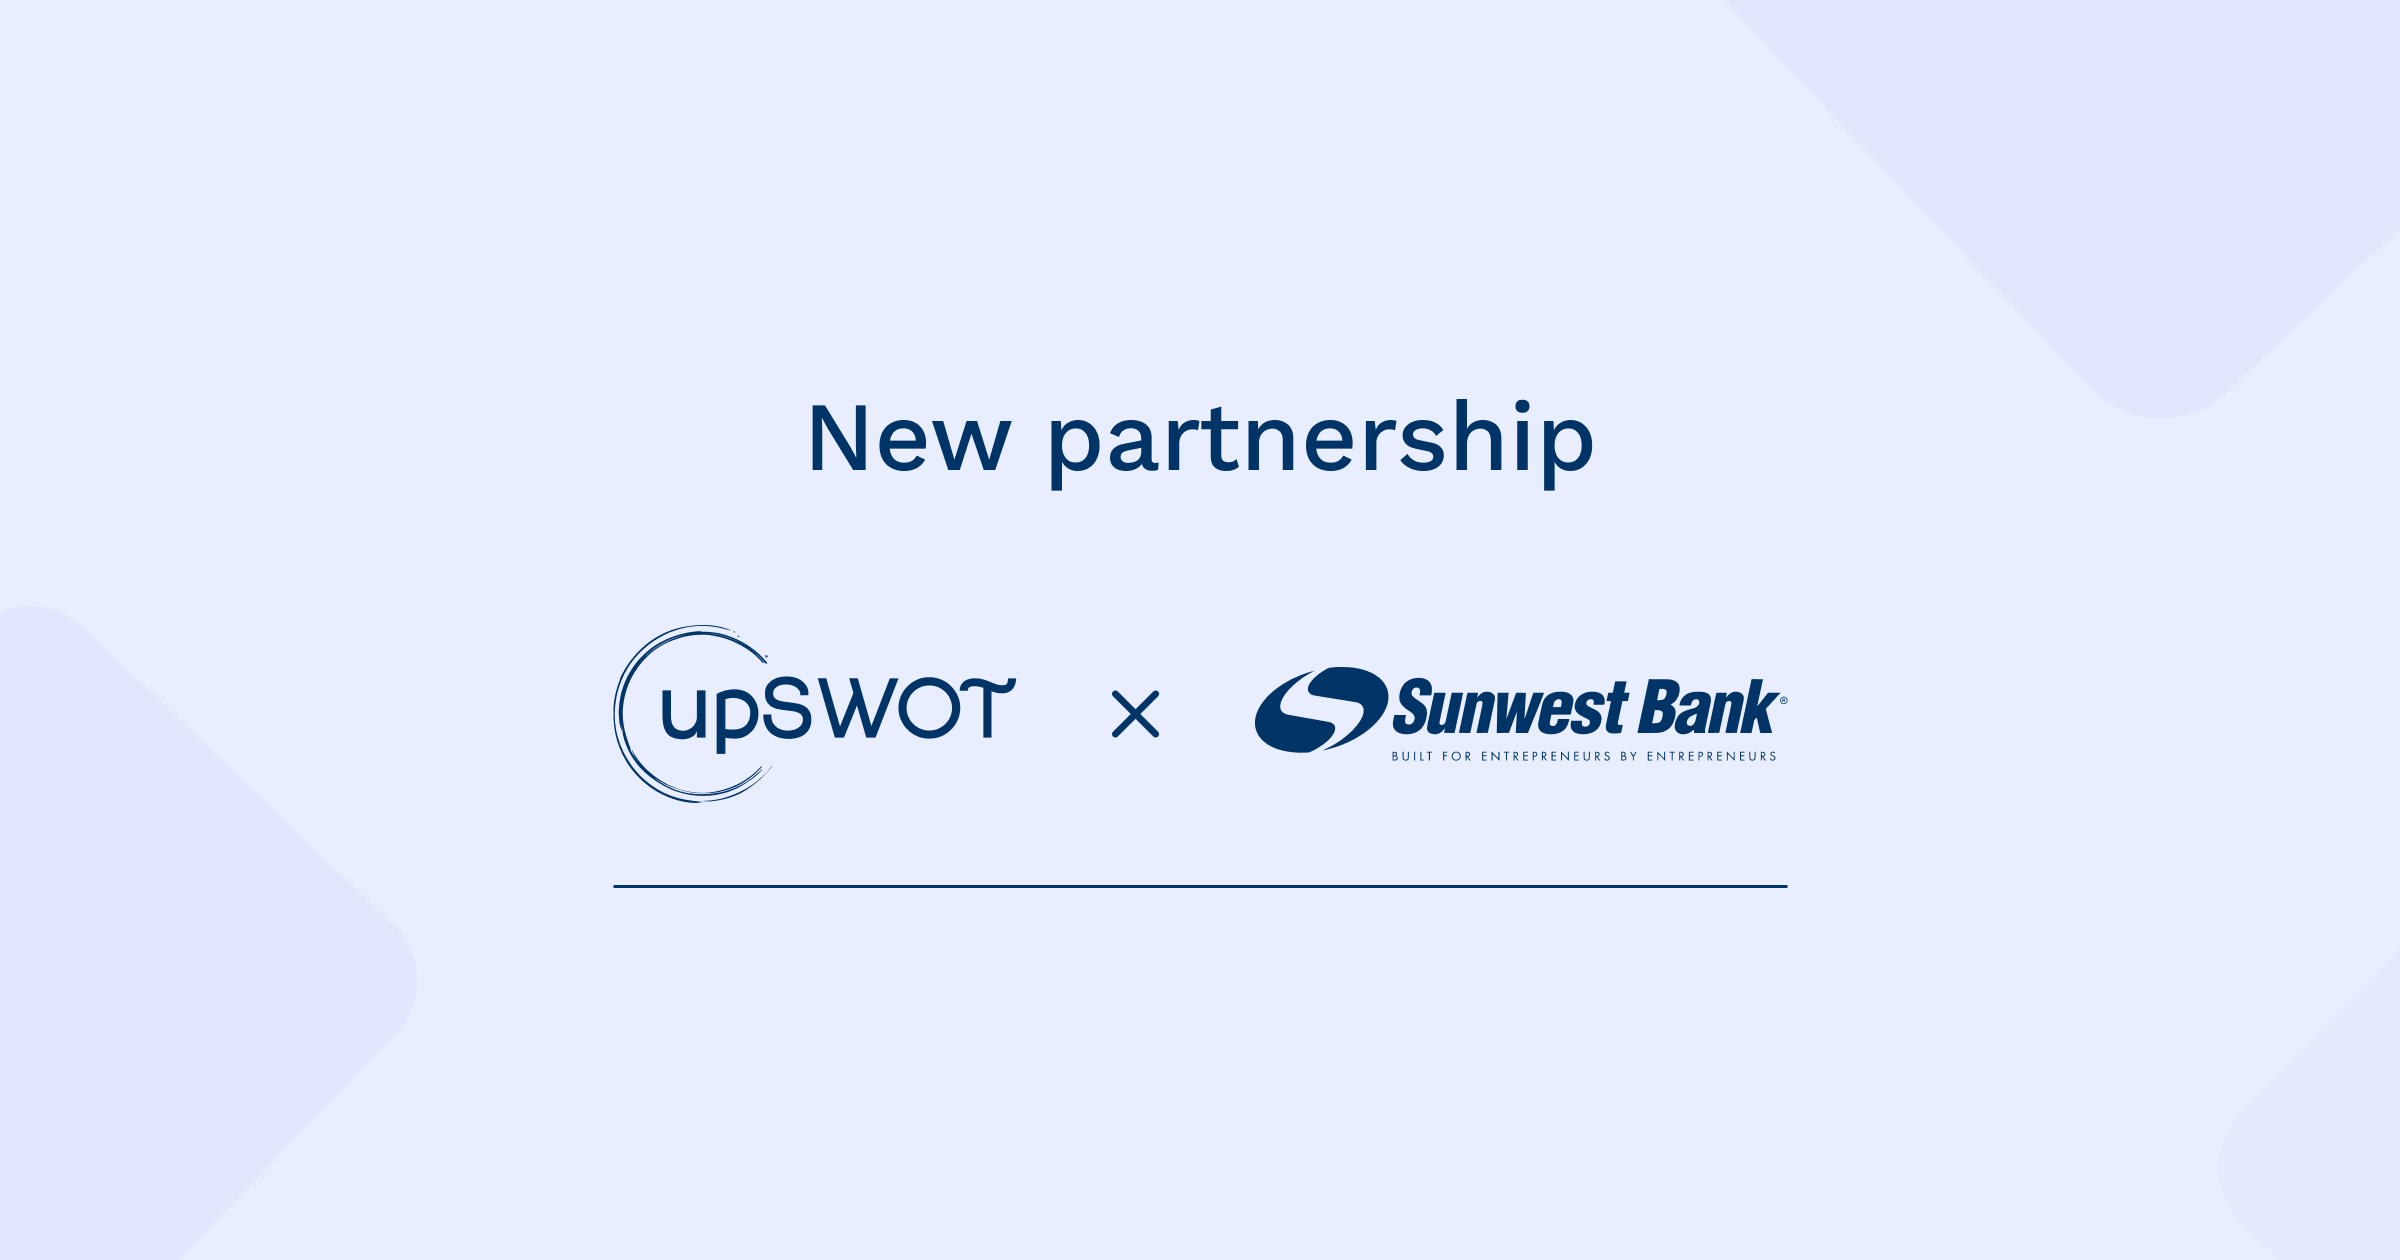 upSWOT and Sunwest Bank Partner to Deliver the Modern Digital Banking Experience to Small and Medium Businesses